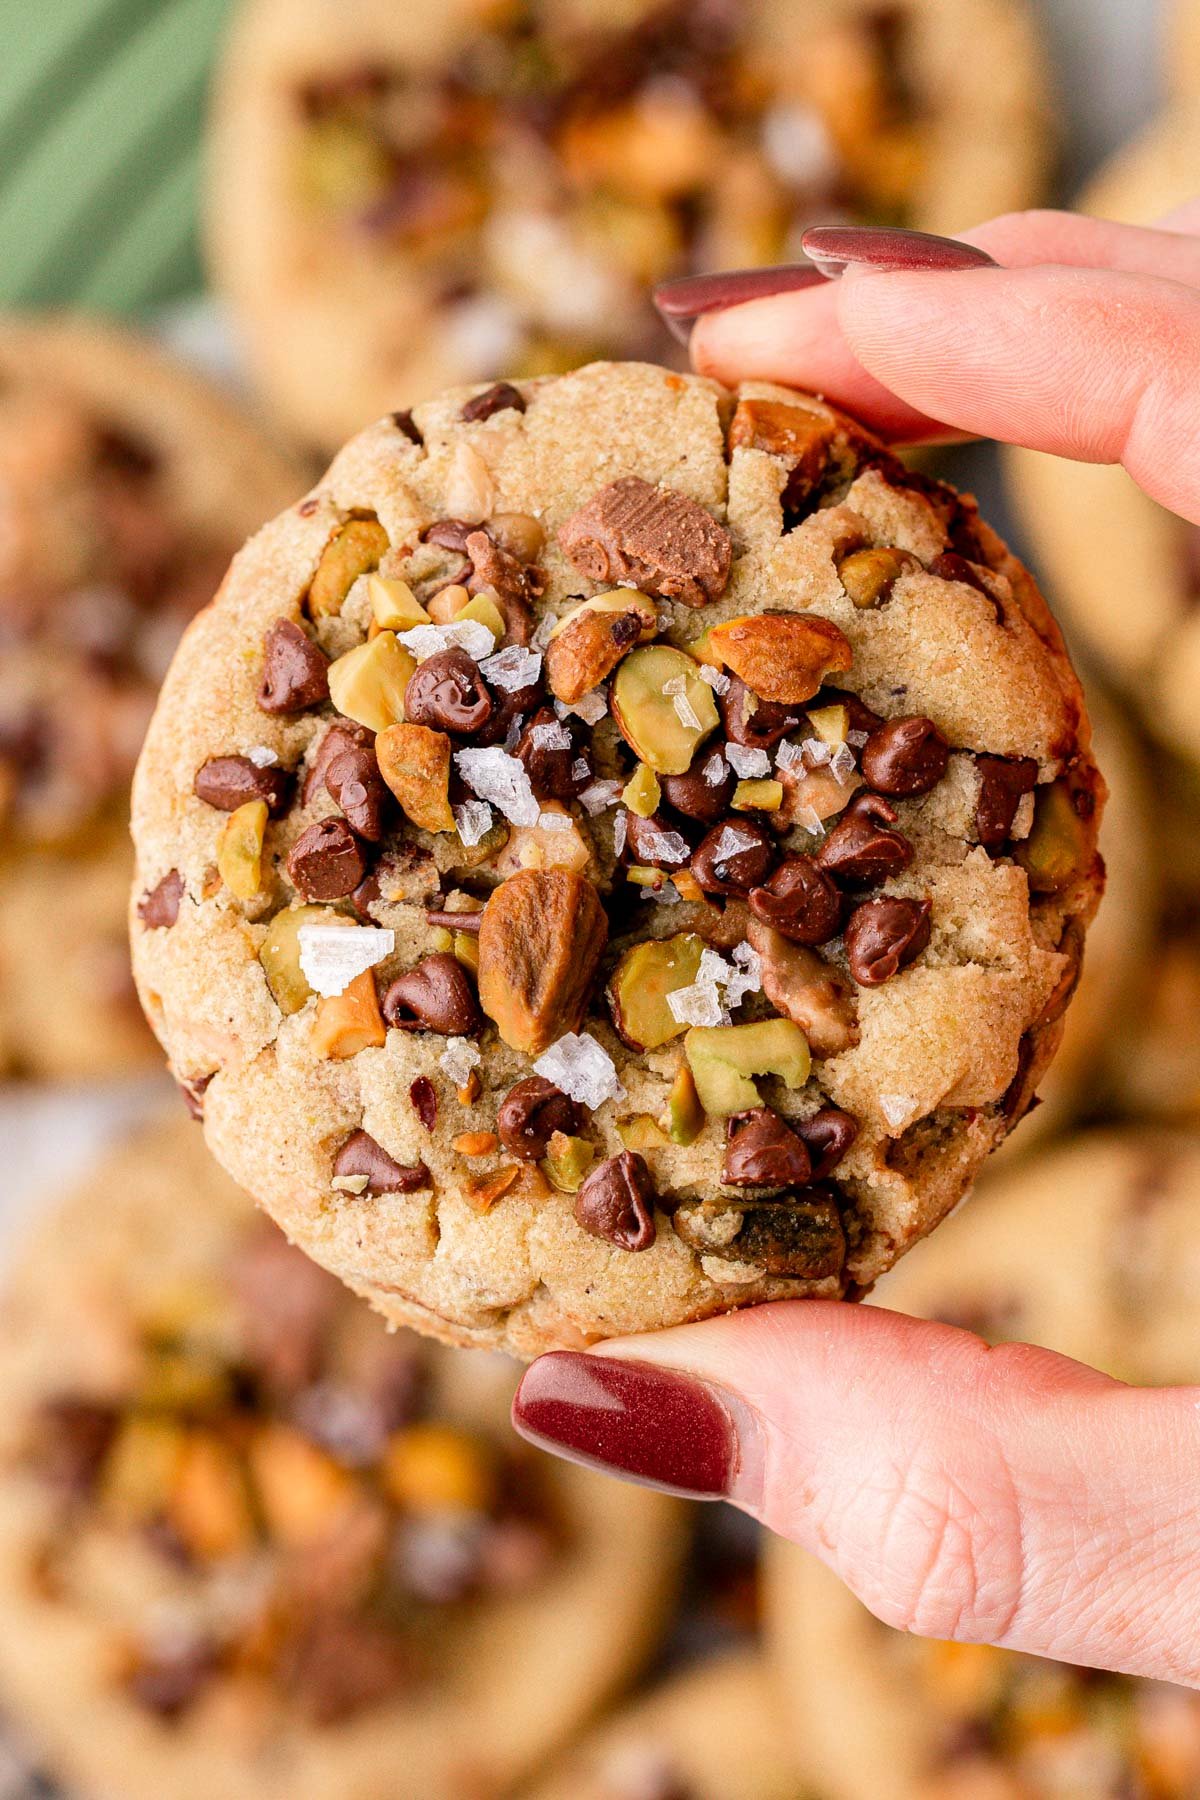 A woman's hand holding a toffee pistachio chocolate chip cookie.